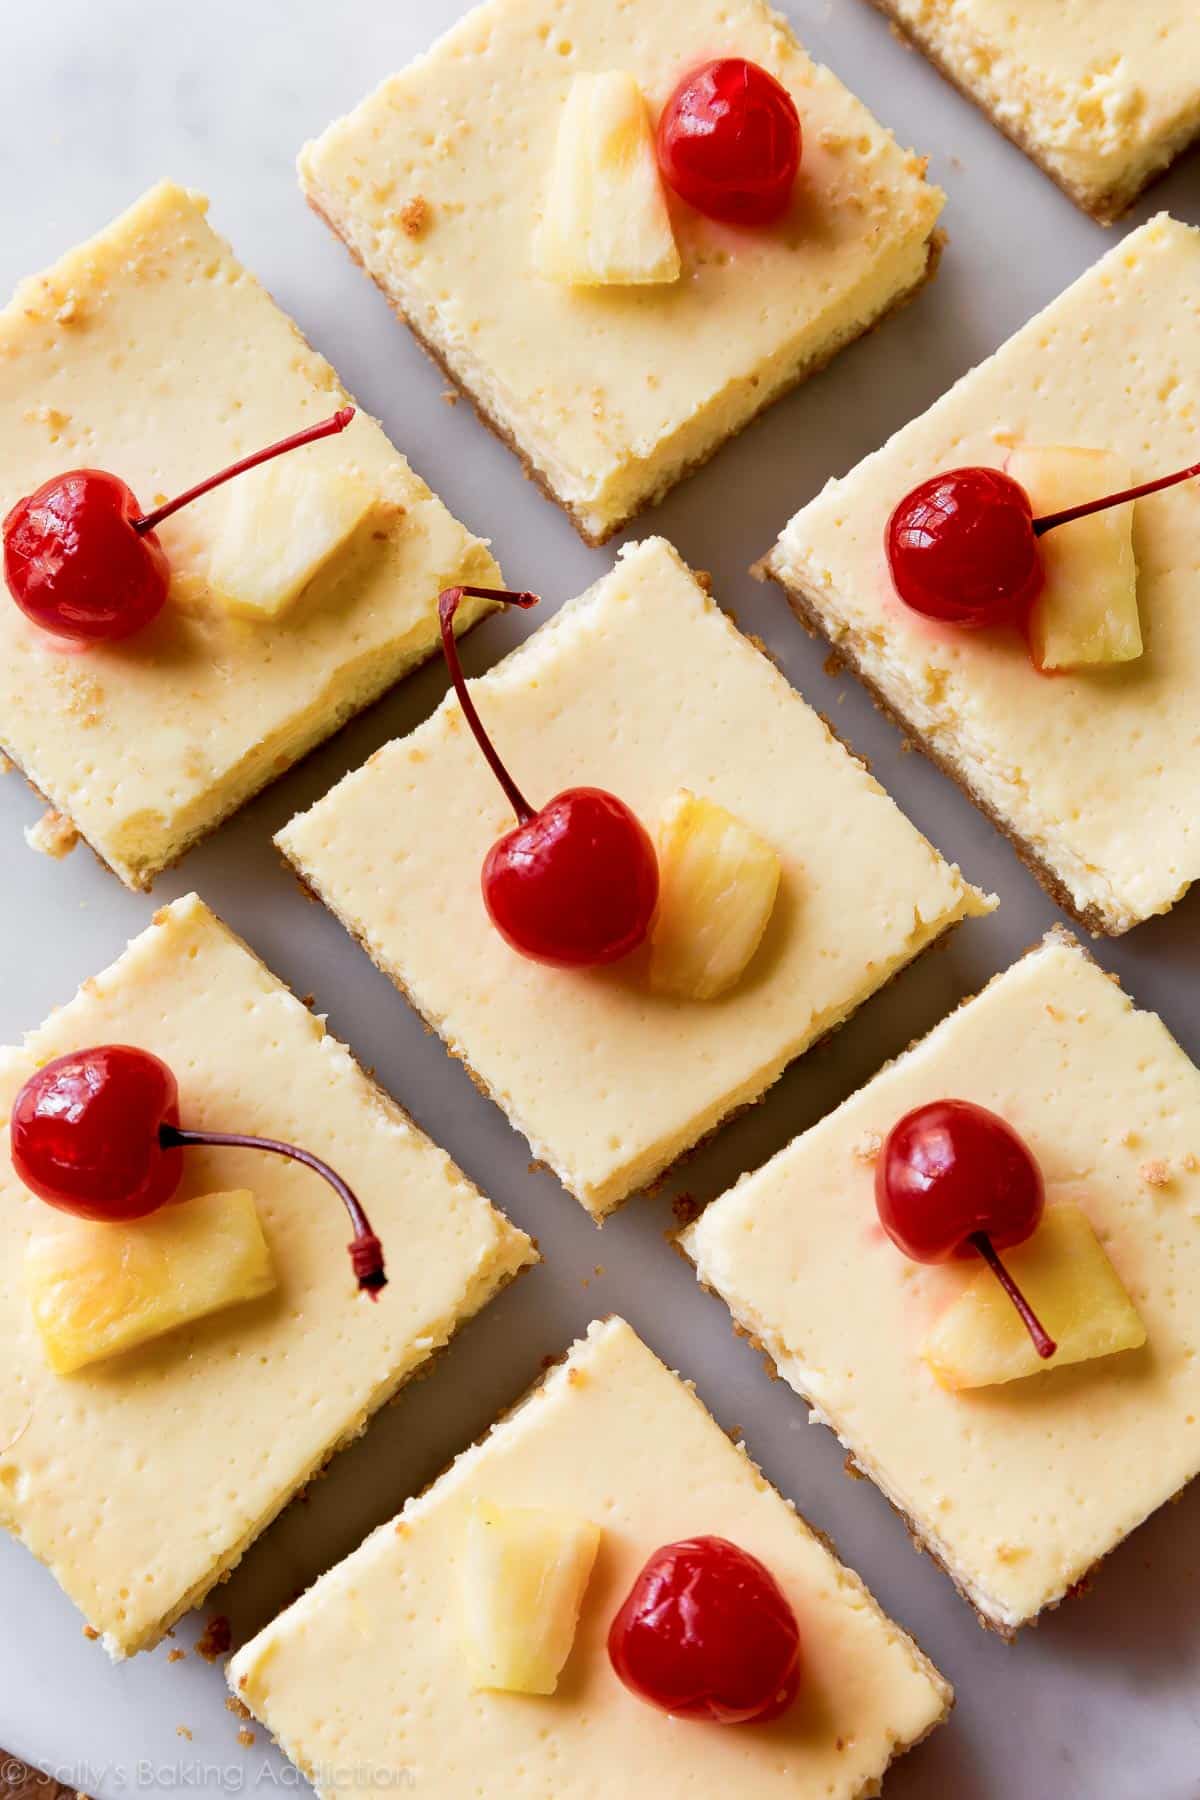 Pineapple bars topped with pineapple slices and cherries